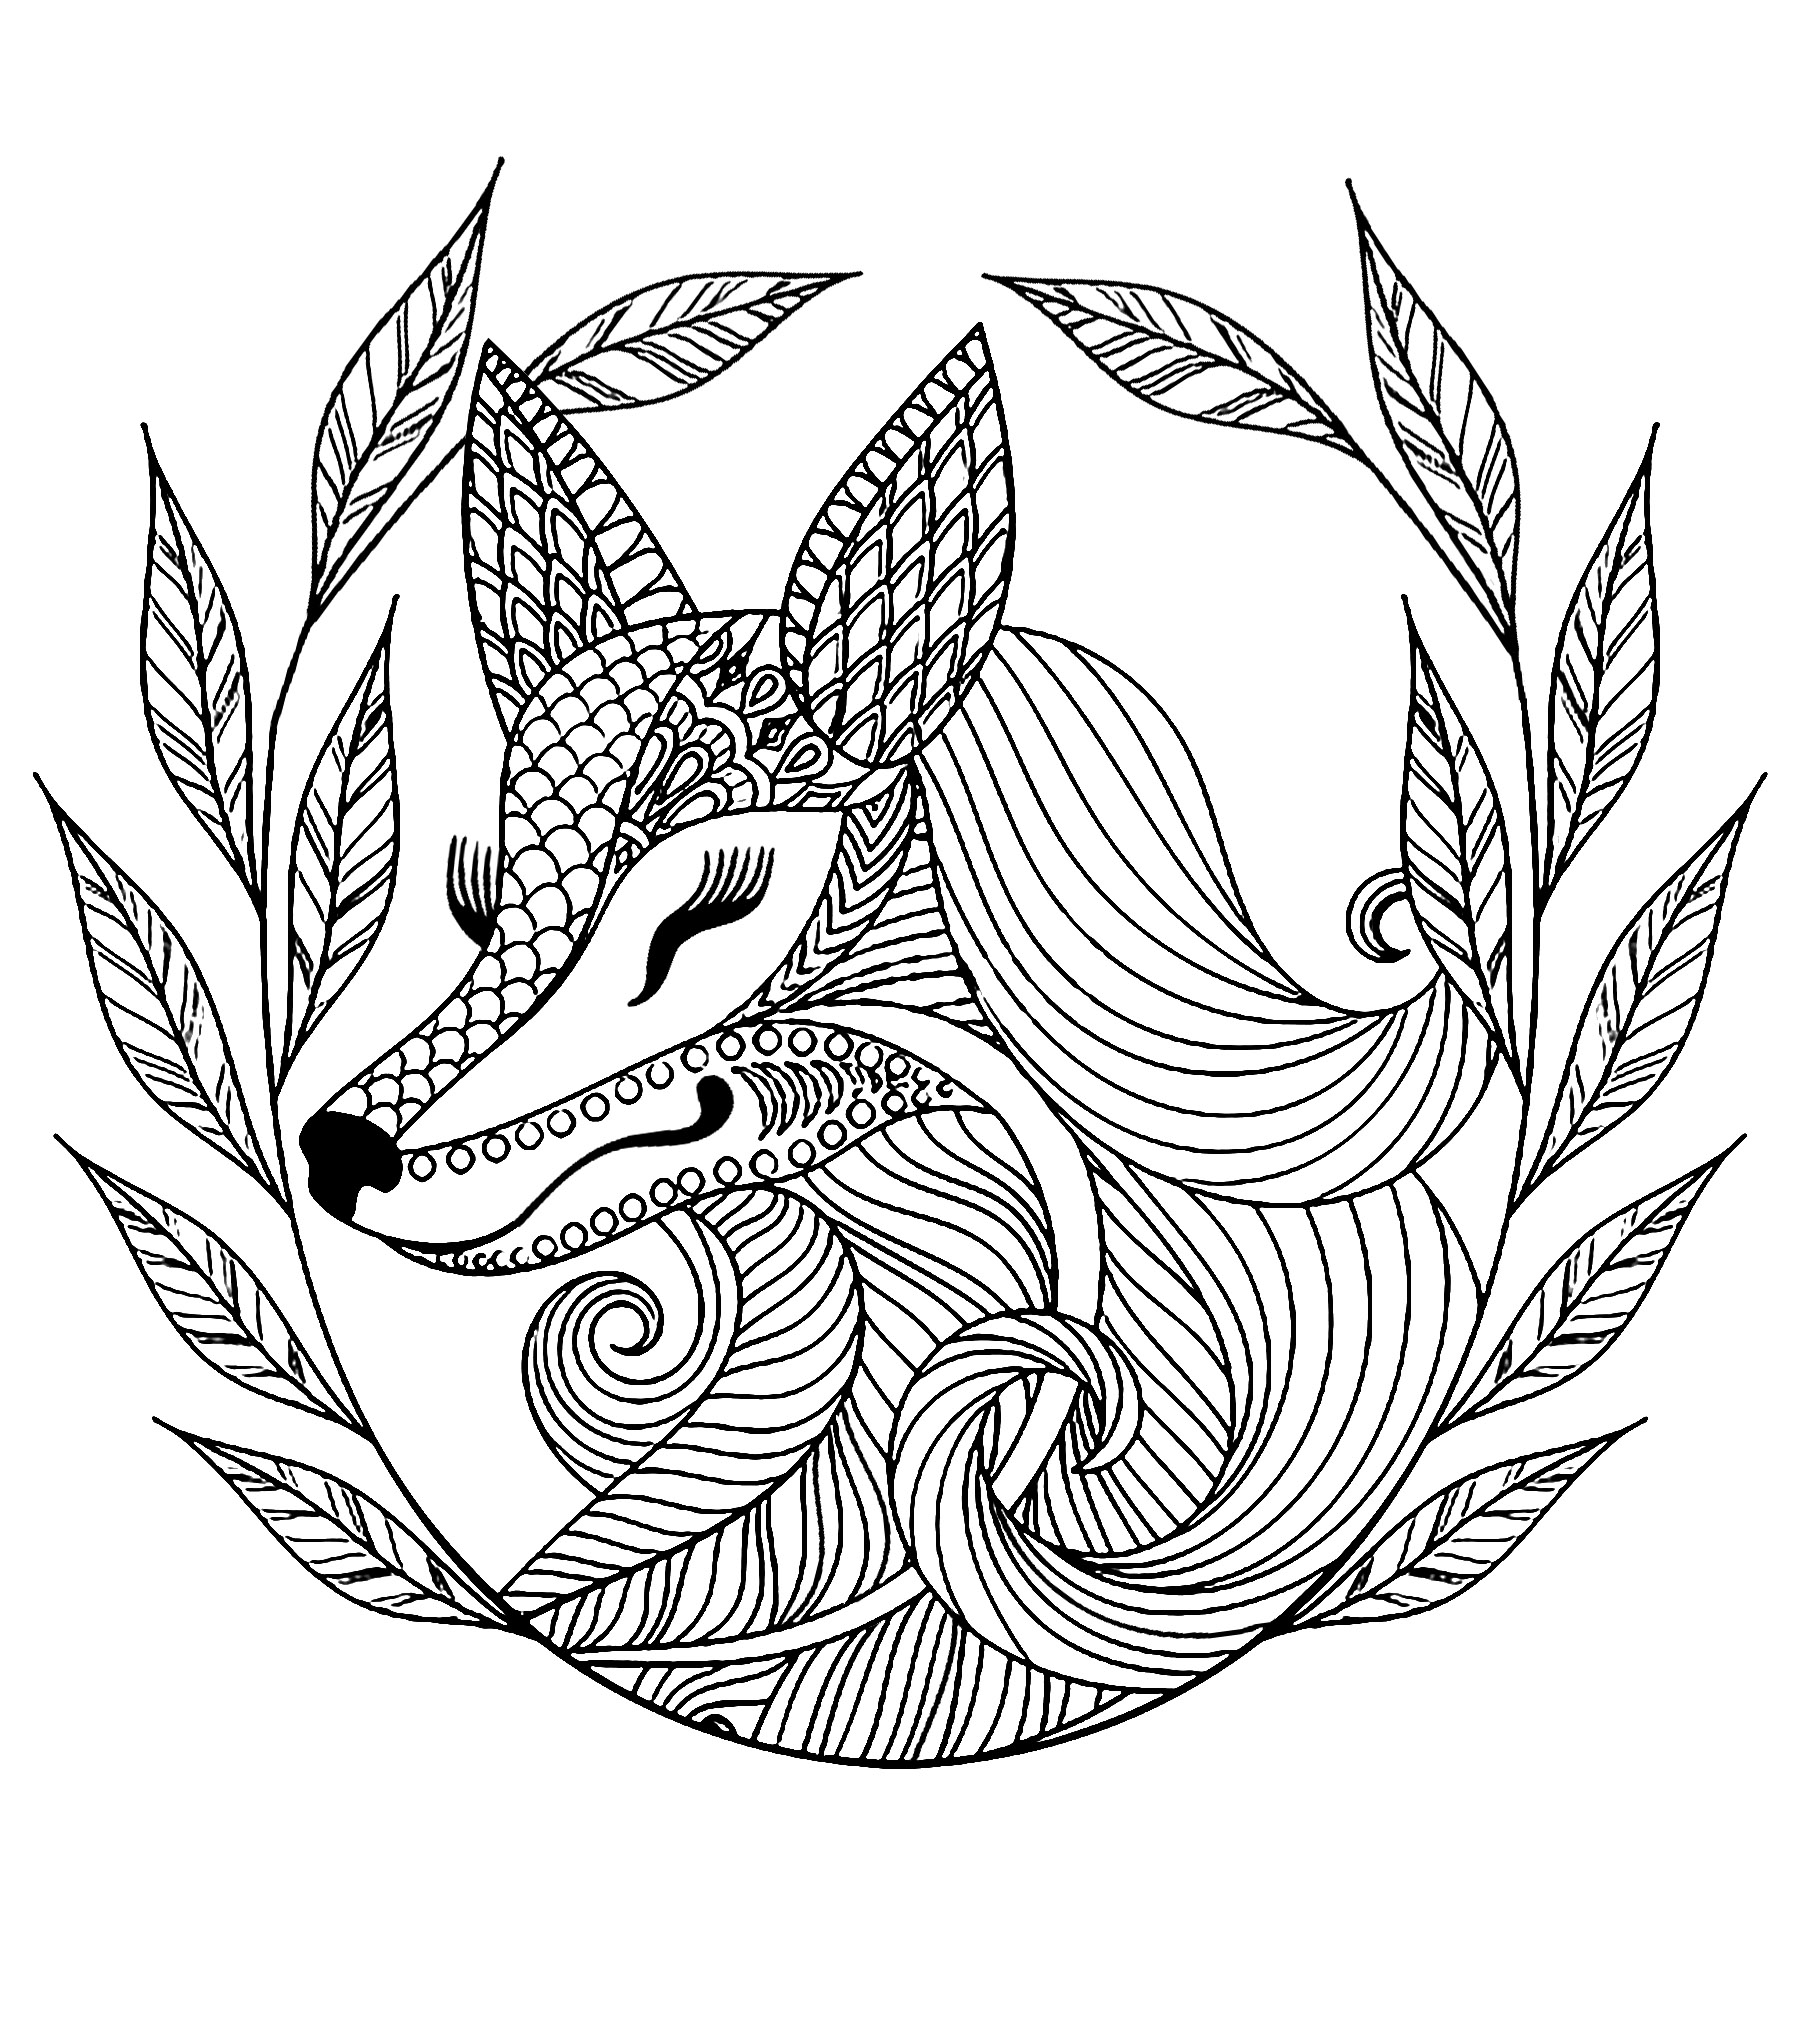 Fox and leaves | Animals - Coloring pages for adults ...